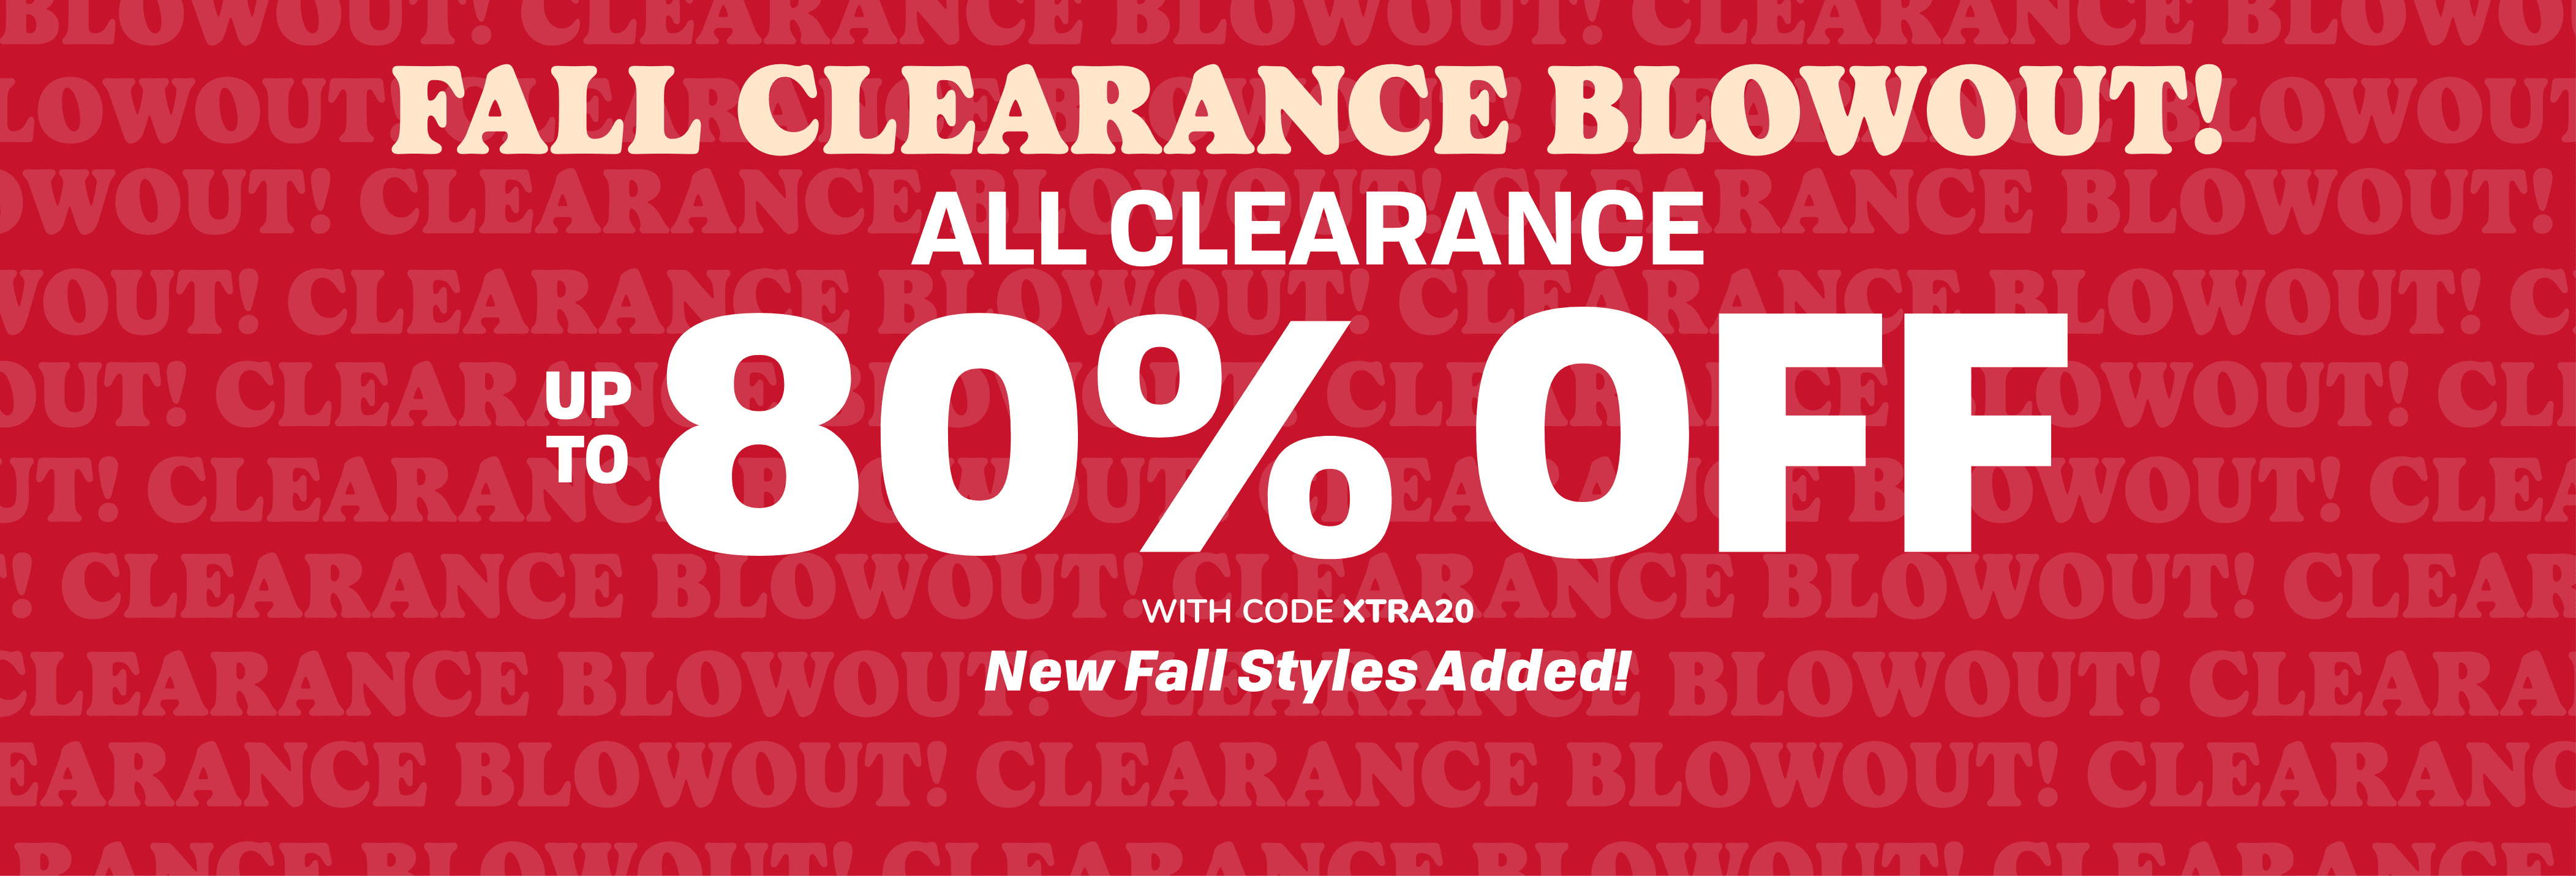 All Clearance 70-80% Off